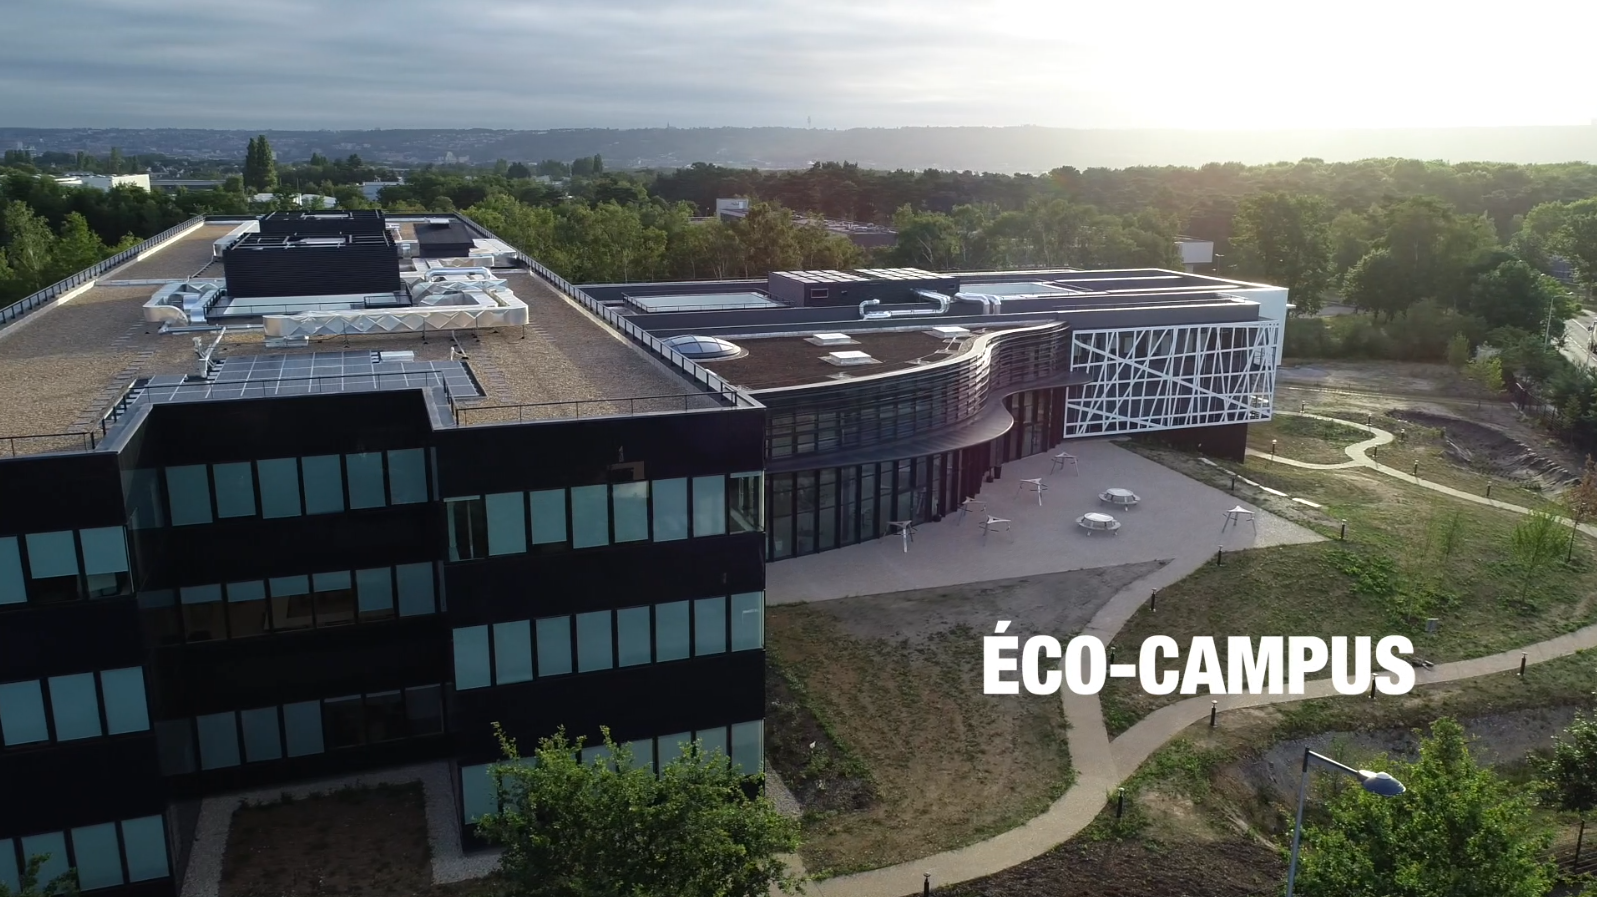 Fly over the CESI Rouen eco-campus, an innovative operation realized by Eiffage Construction